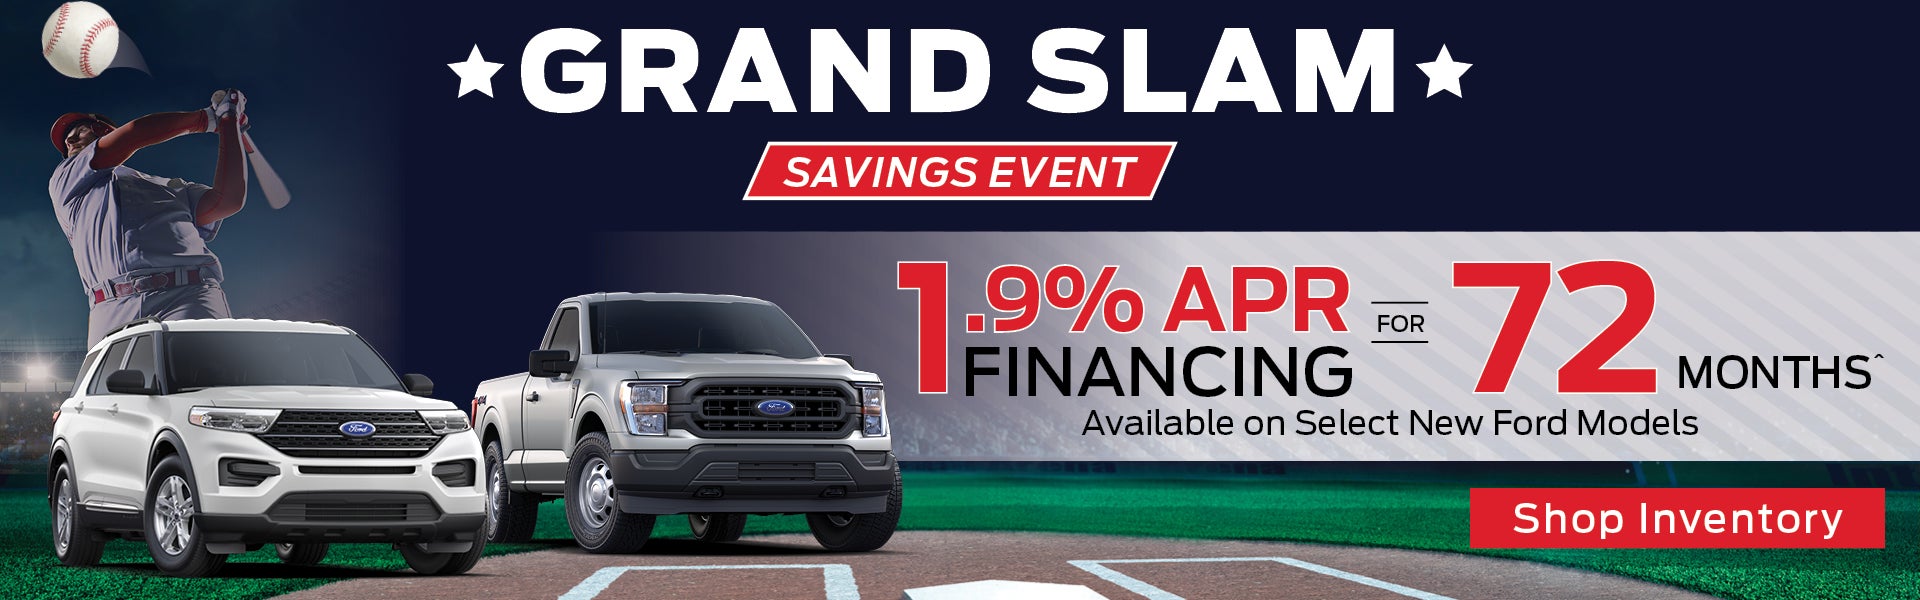 1.9% APR Financing for 72 Mos^